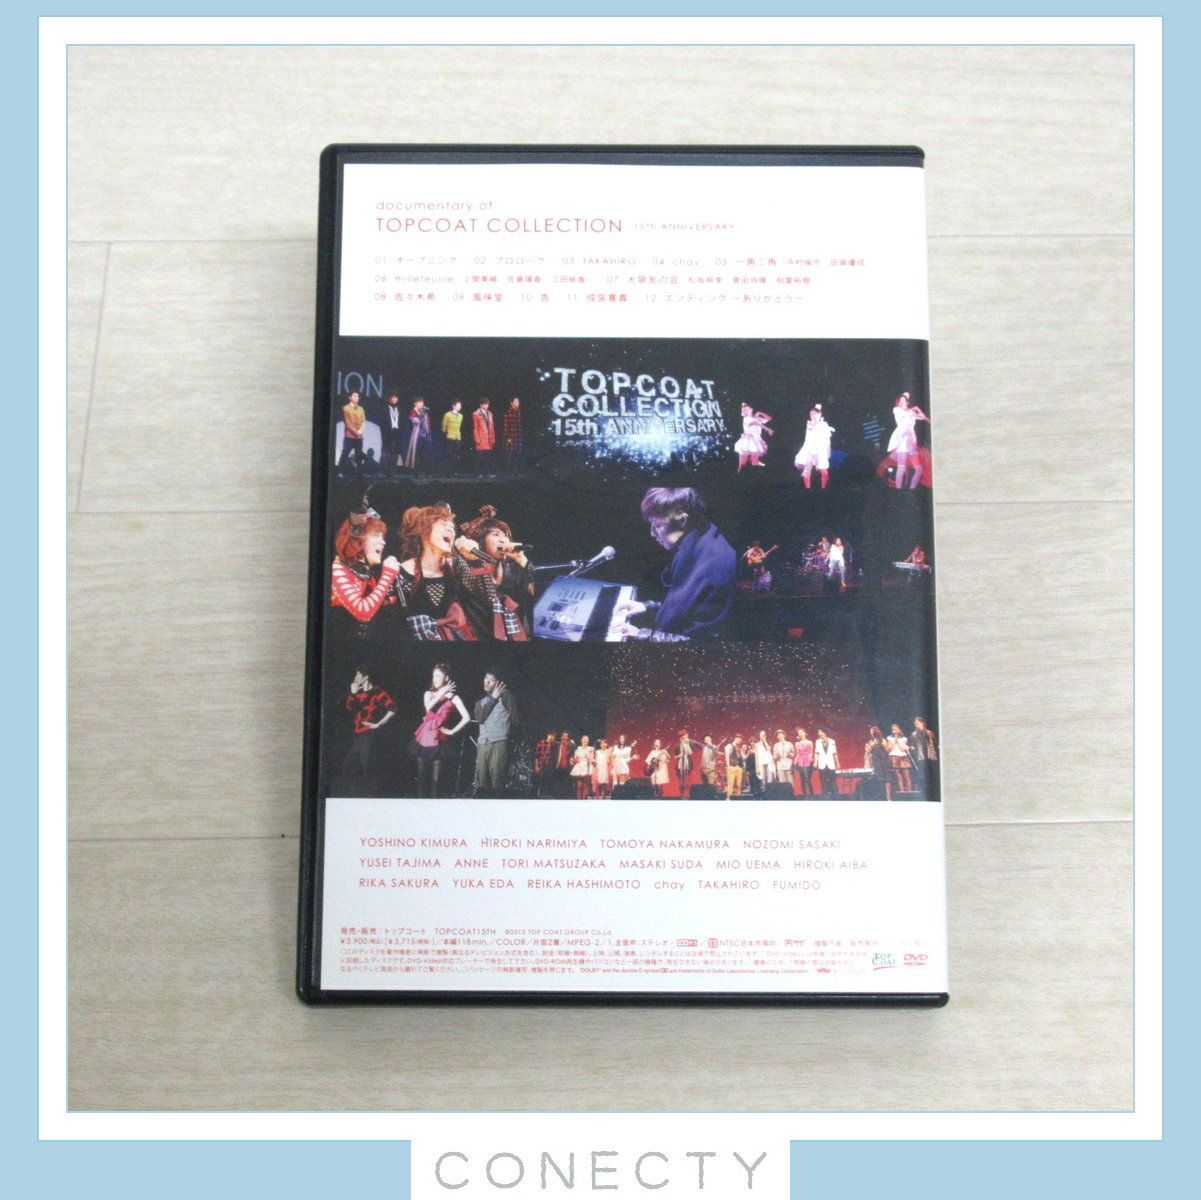 DVD★documentary of TOPCOAT COLLECTION 15th ANNIVERSARY(6135